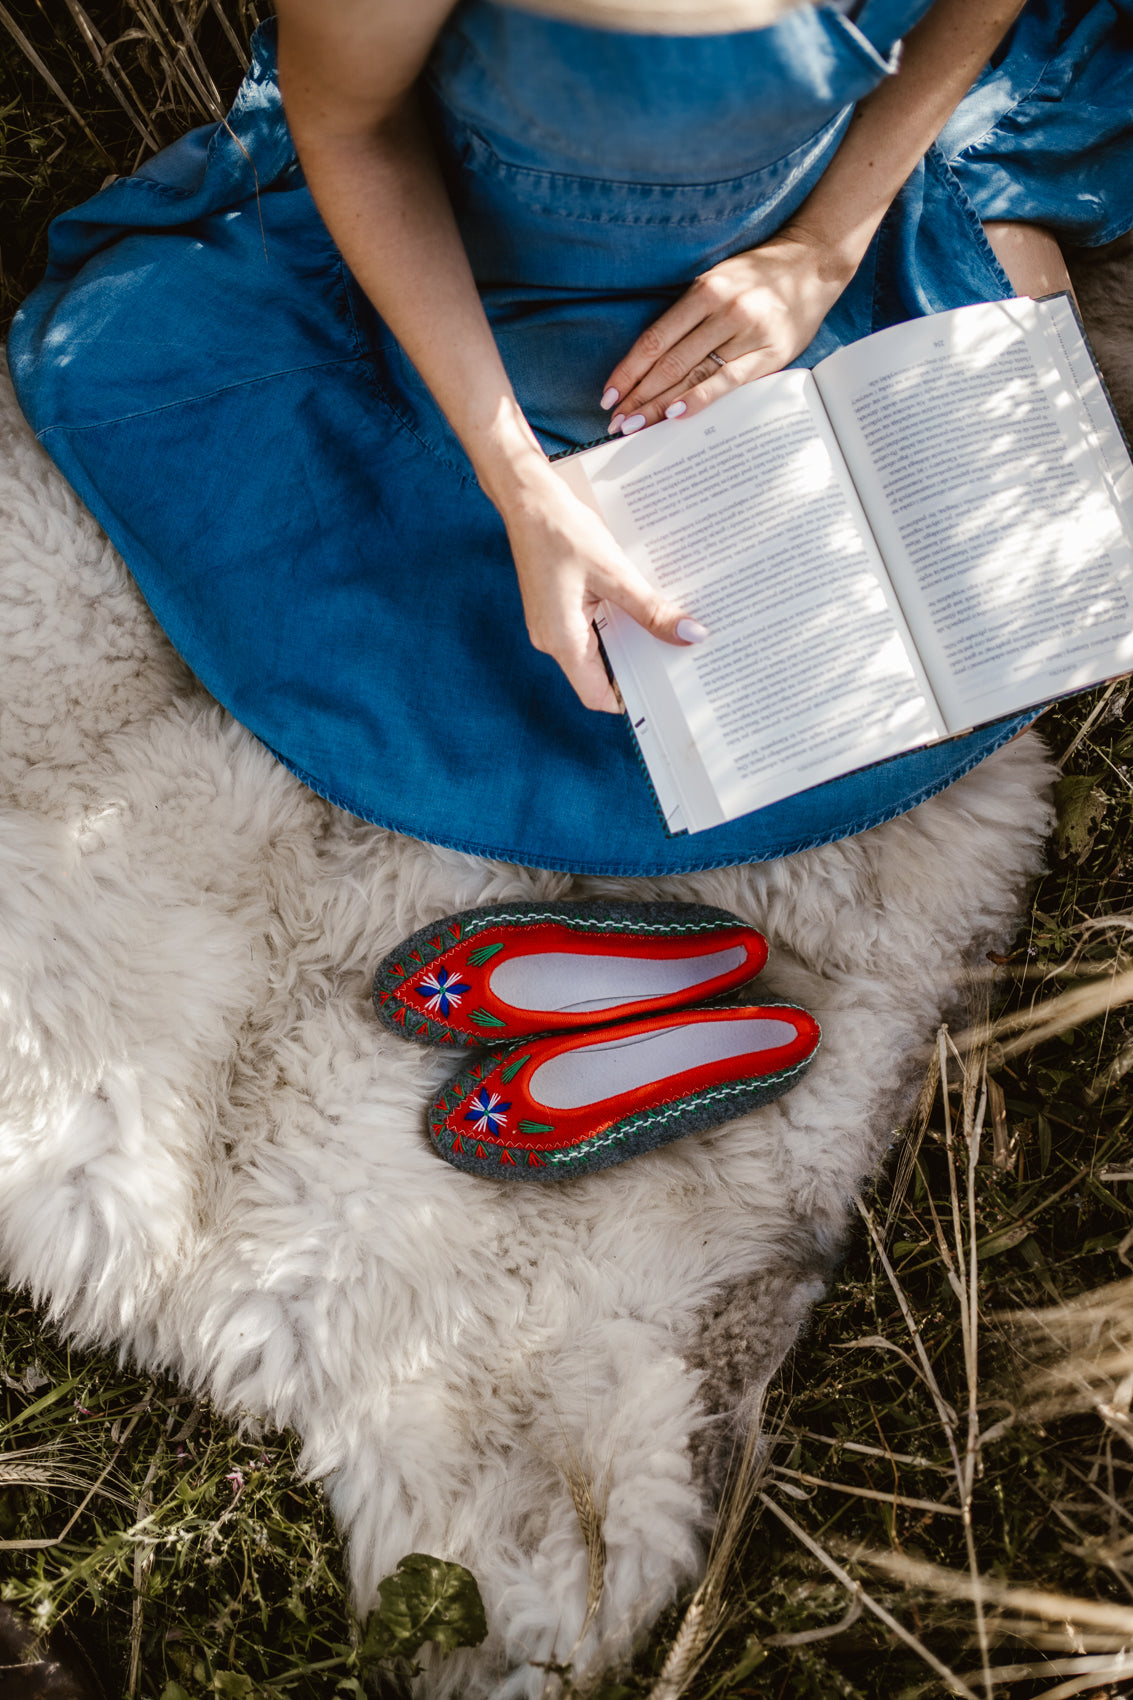 Woman sitting on soft fluffy sheepskin. She is reading book in nature feeling relax and cosy. In front of her are wool felt handmade folk, boho style slippers